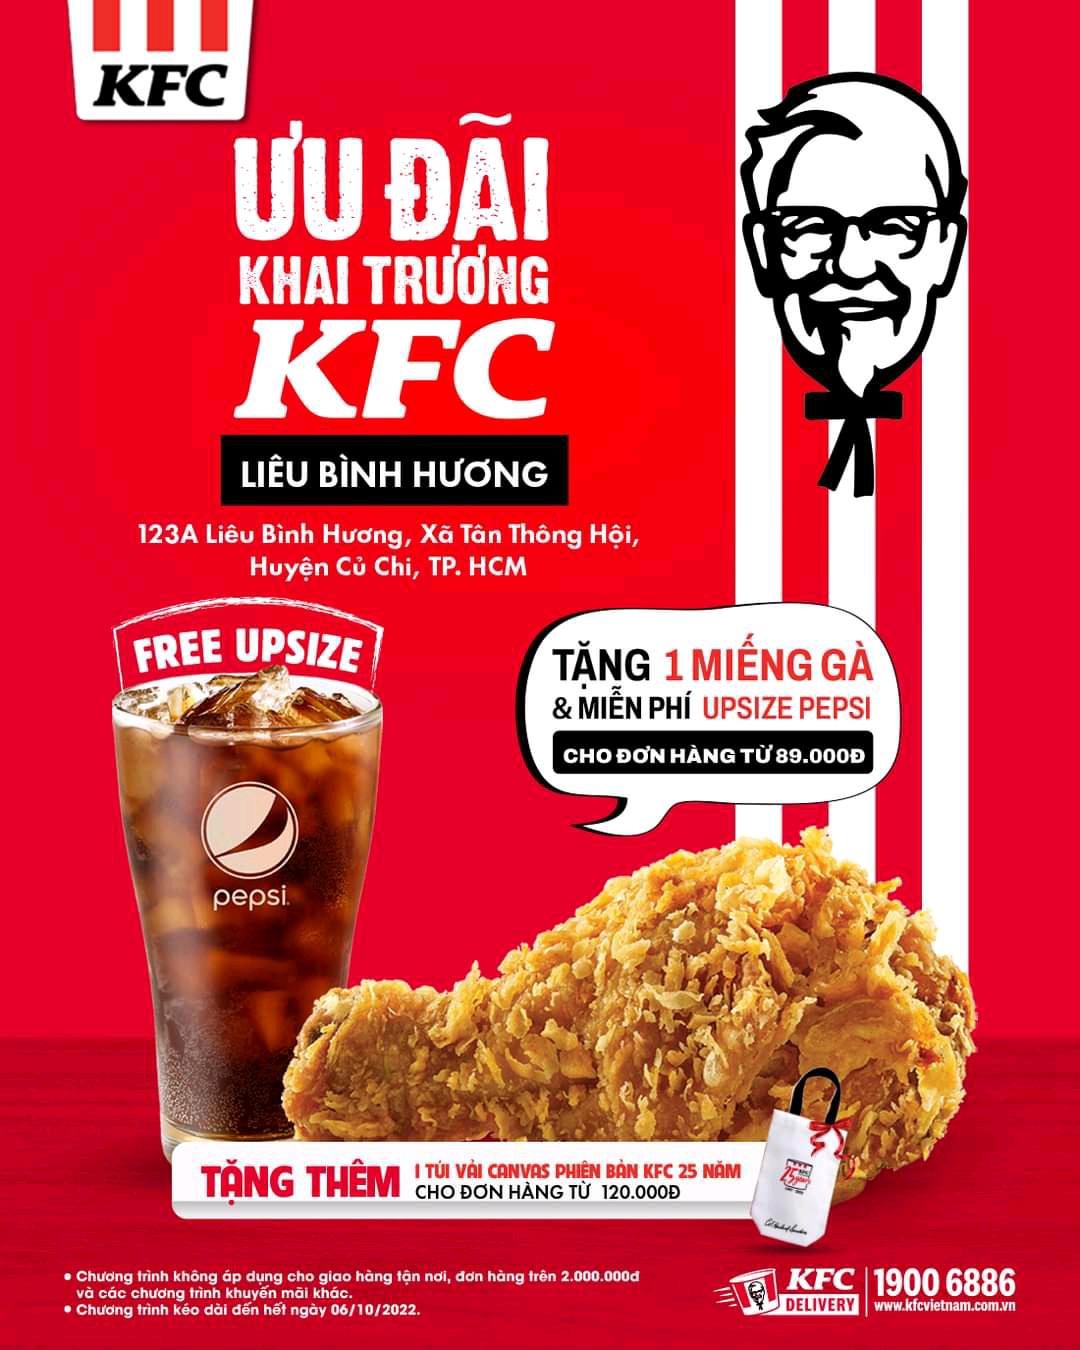 KFC nearby tonight in #saigon #tphcm delivery by #ubereats vs takeaway vs takeout #quan1 #menu #couponcode 